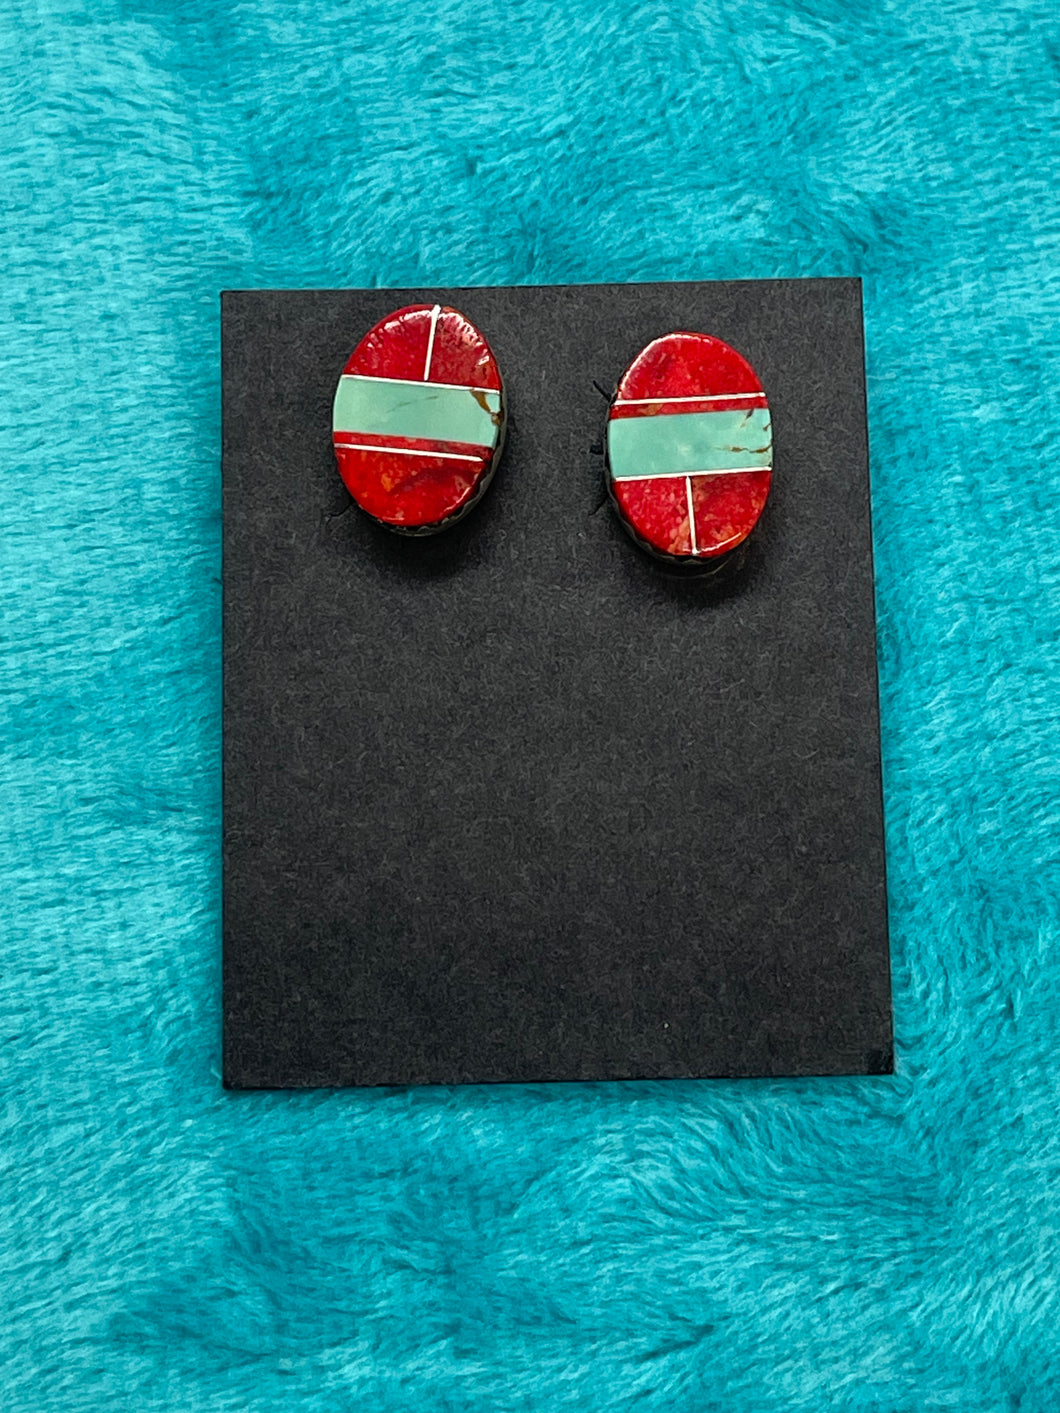 Turquoise and Coral earrings